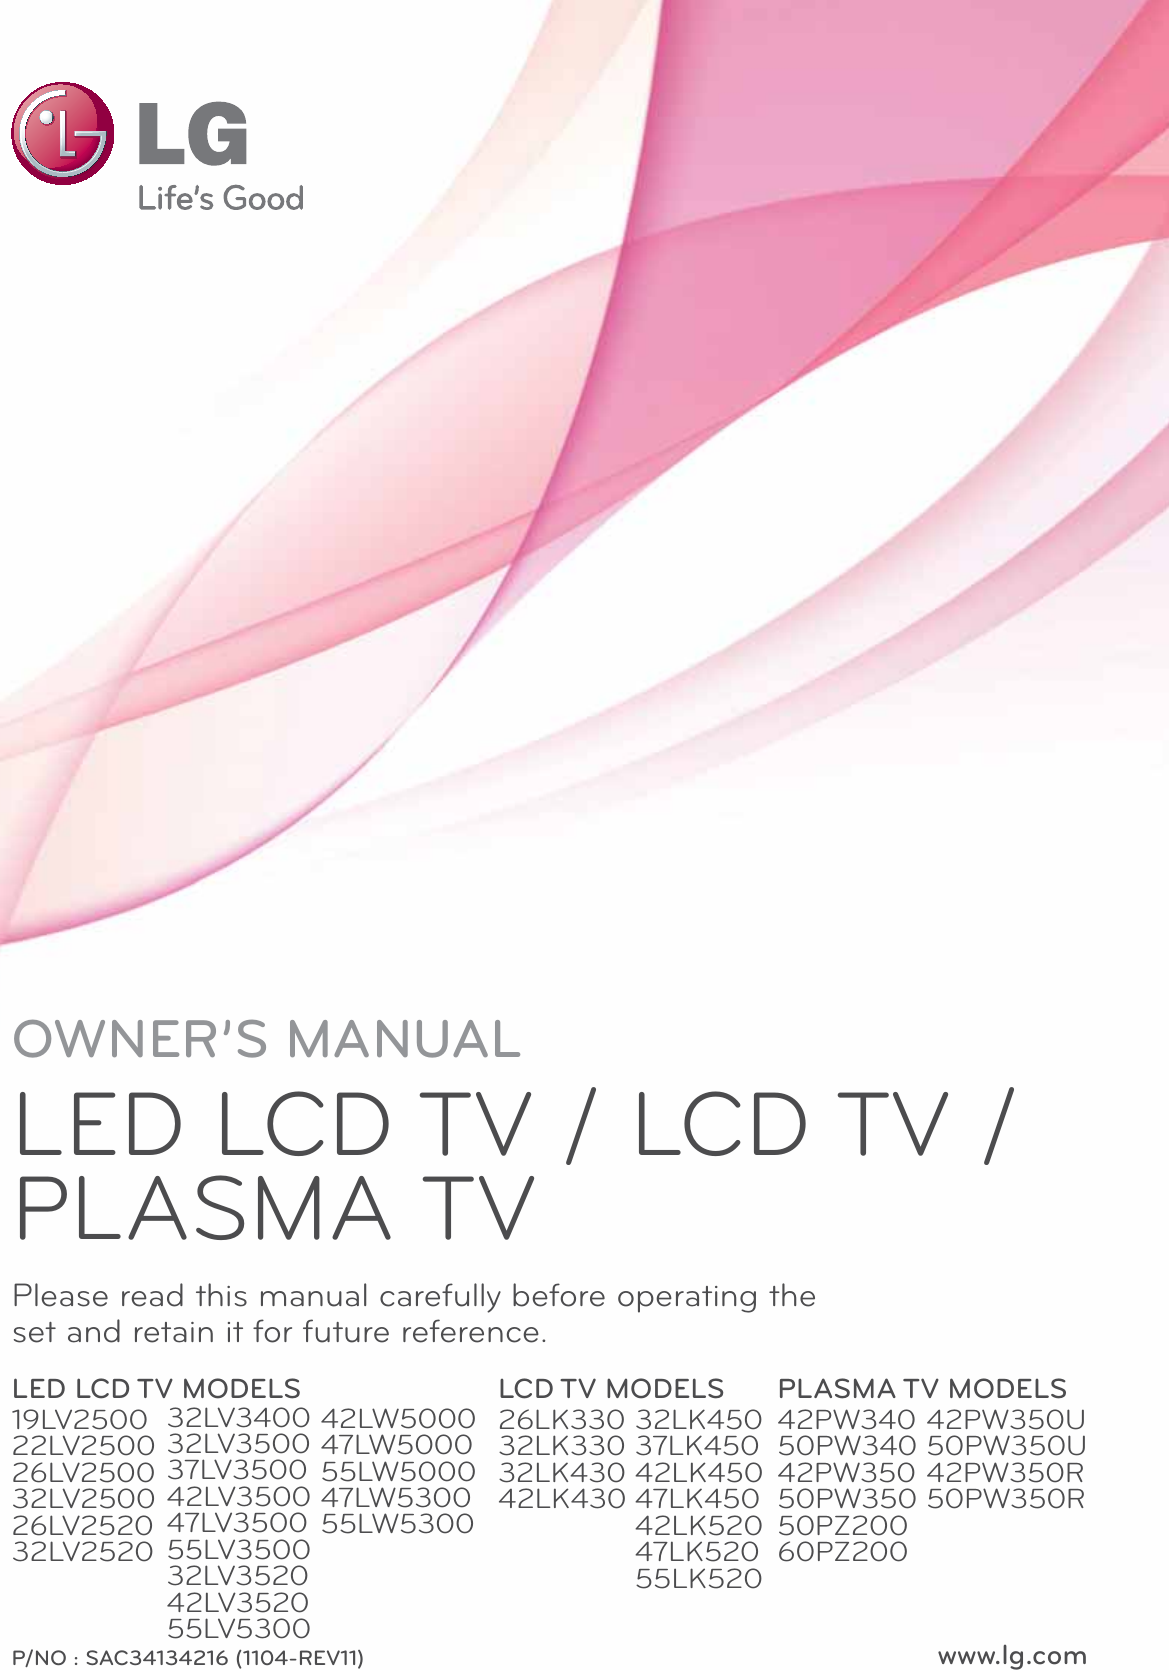 www.lg.comP/NO : SAC34134216 (1104-REV11)OWNER’S MANUALLED LCD TV / LCD TV / PLASMA TVPlease read this manual carefully before operating the set and retain it for future reference.LED LCD TV MODELS19LV250022LV250026LV250032LV250026LV252032LV2520LCD TV MODELS26LK33032LK33032LK43042LK430PLASMA TV MODELS42PW34050PW34042PW35050PW35050PZ20060PZ20032LV340032LV350037LV350042LV350047LV350055LV350032LV352042LV352055LV530032LK45037LK45042LK45047LK45042LK52047LK52055LK52042PW350U50PW350U42PW350R50PW350R42LW500047LW500055LW500047LW530055LW5300